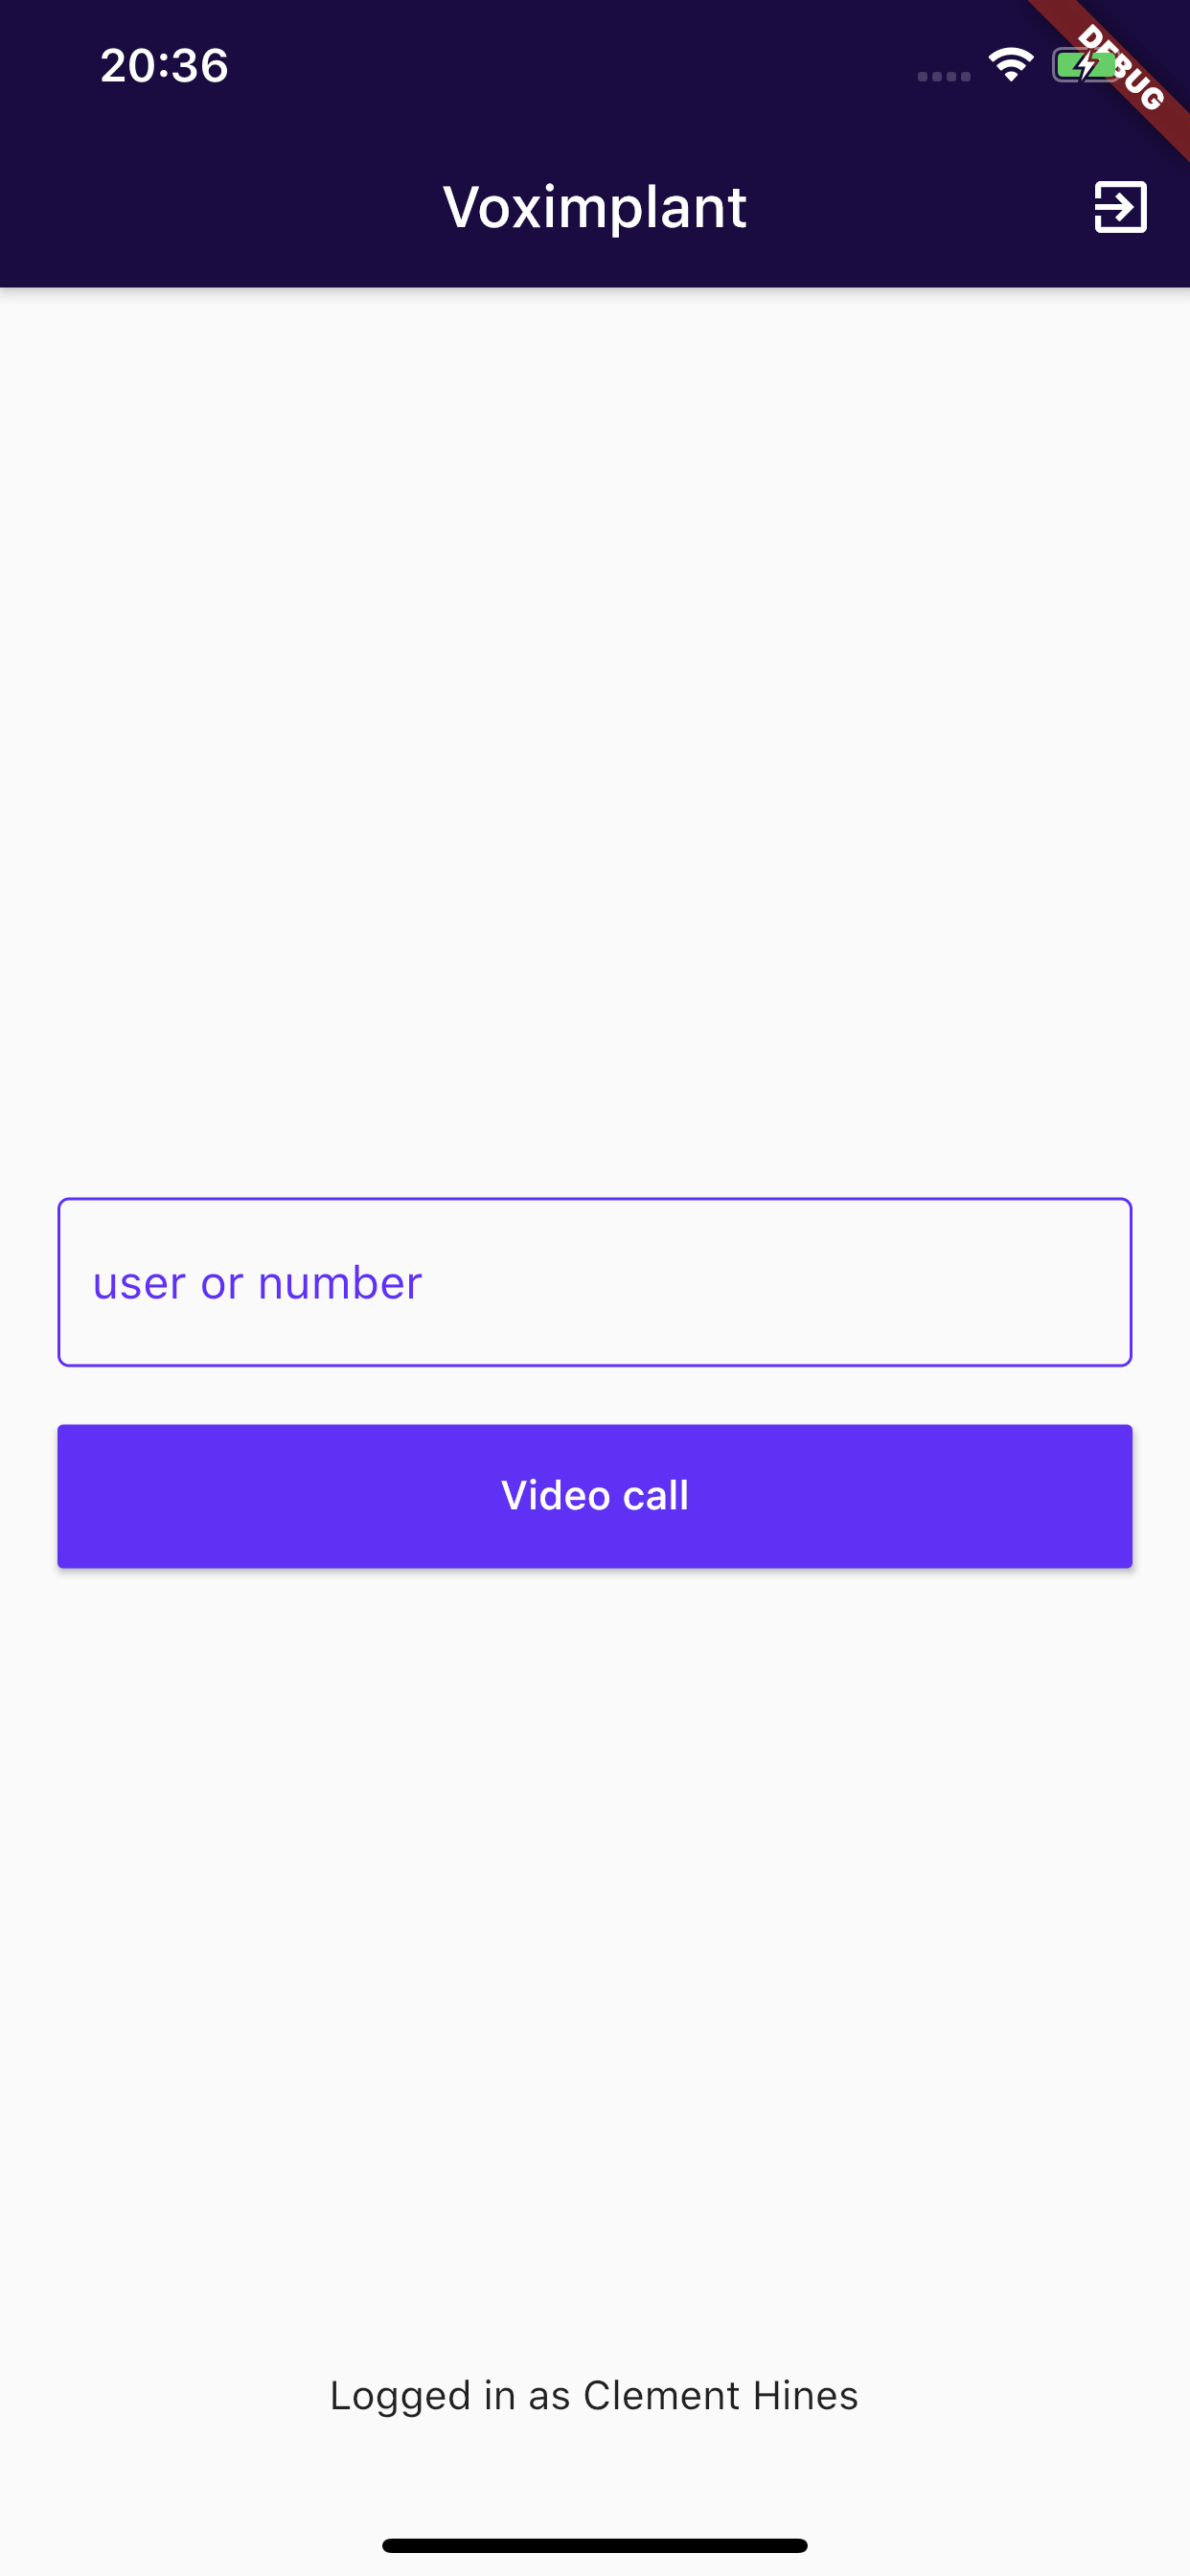 iOS user dials a number